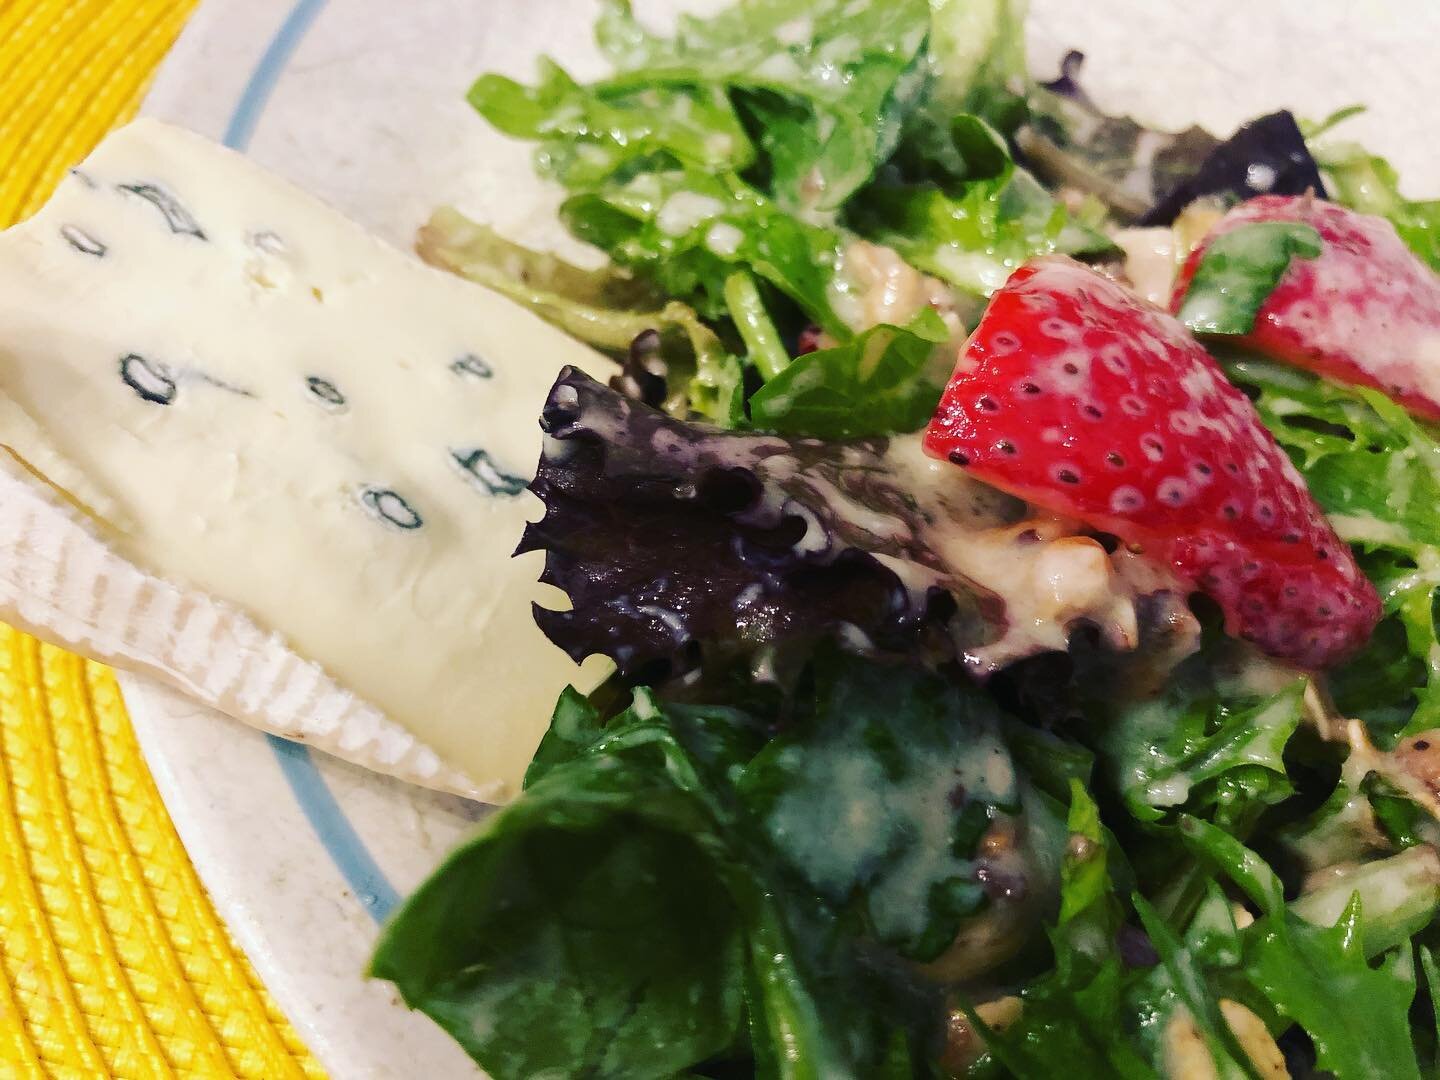 Sometimes bleu cheese can be too overpowering in a meal. That&rsquo;s why this mild triple cream brie bleu is the perfect addition to your meals! We melted ours down and mixed it together with a raspberry vinaigrette dressing to put on our strawberry